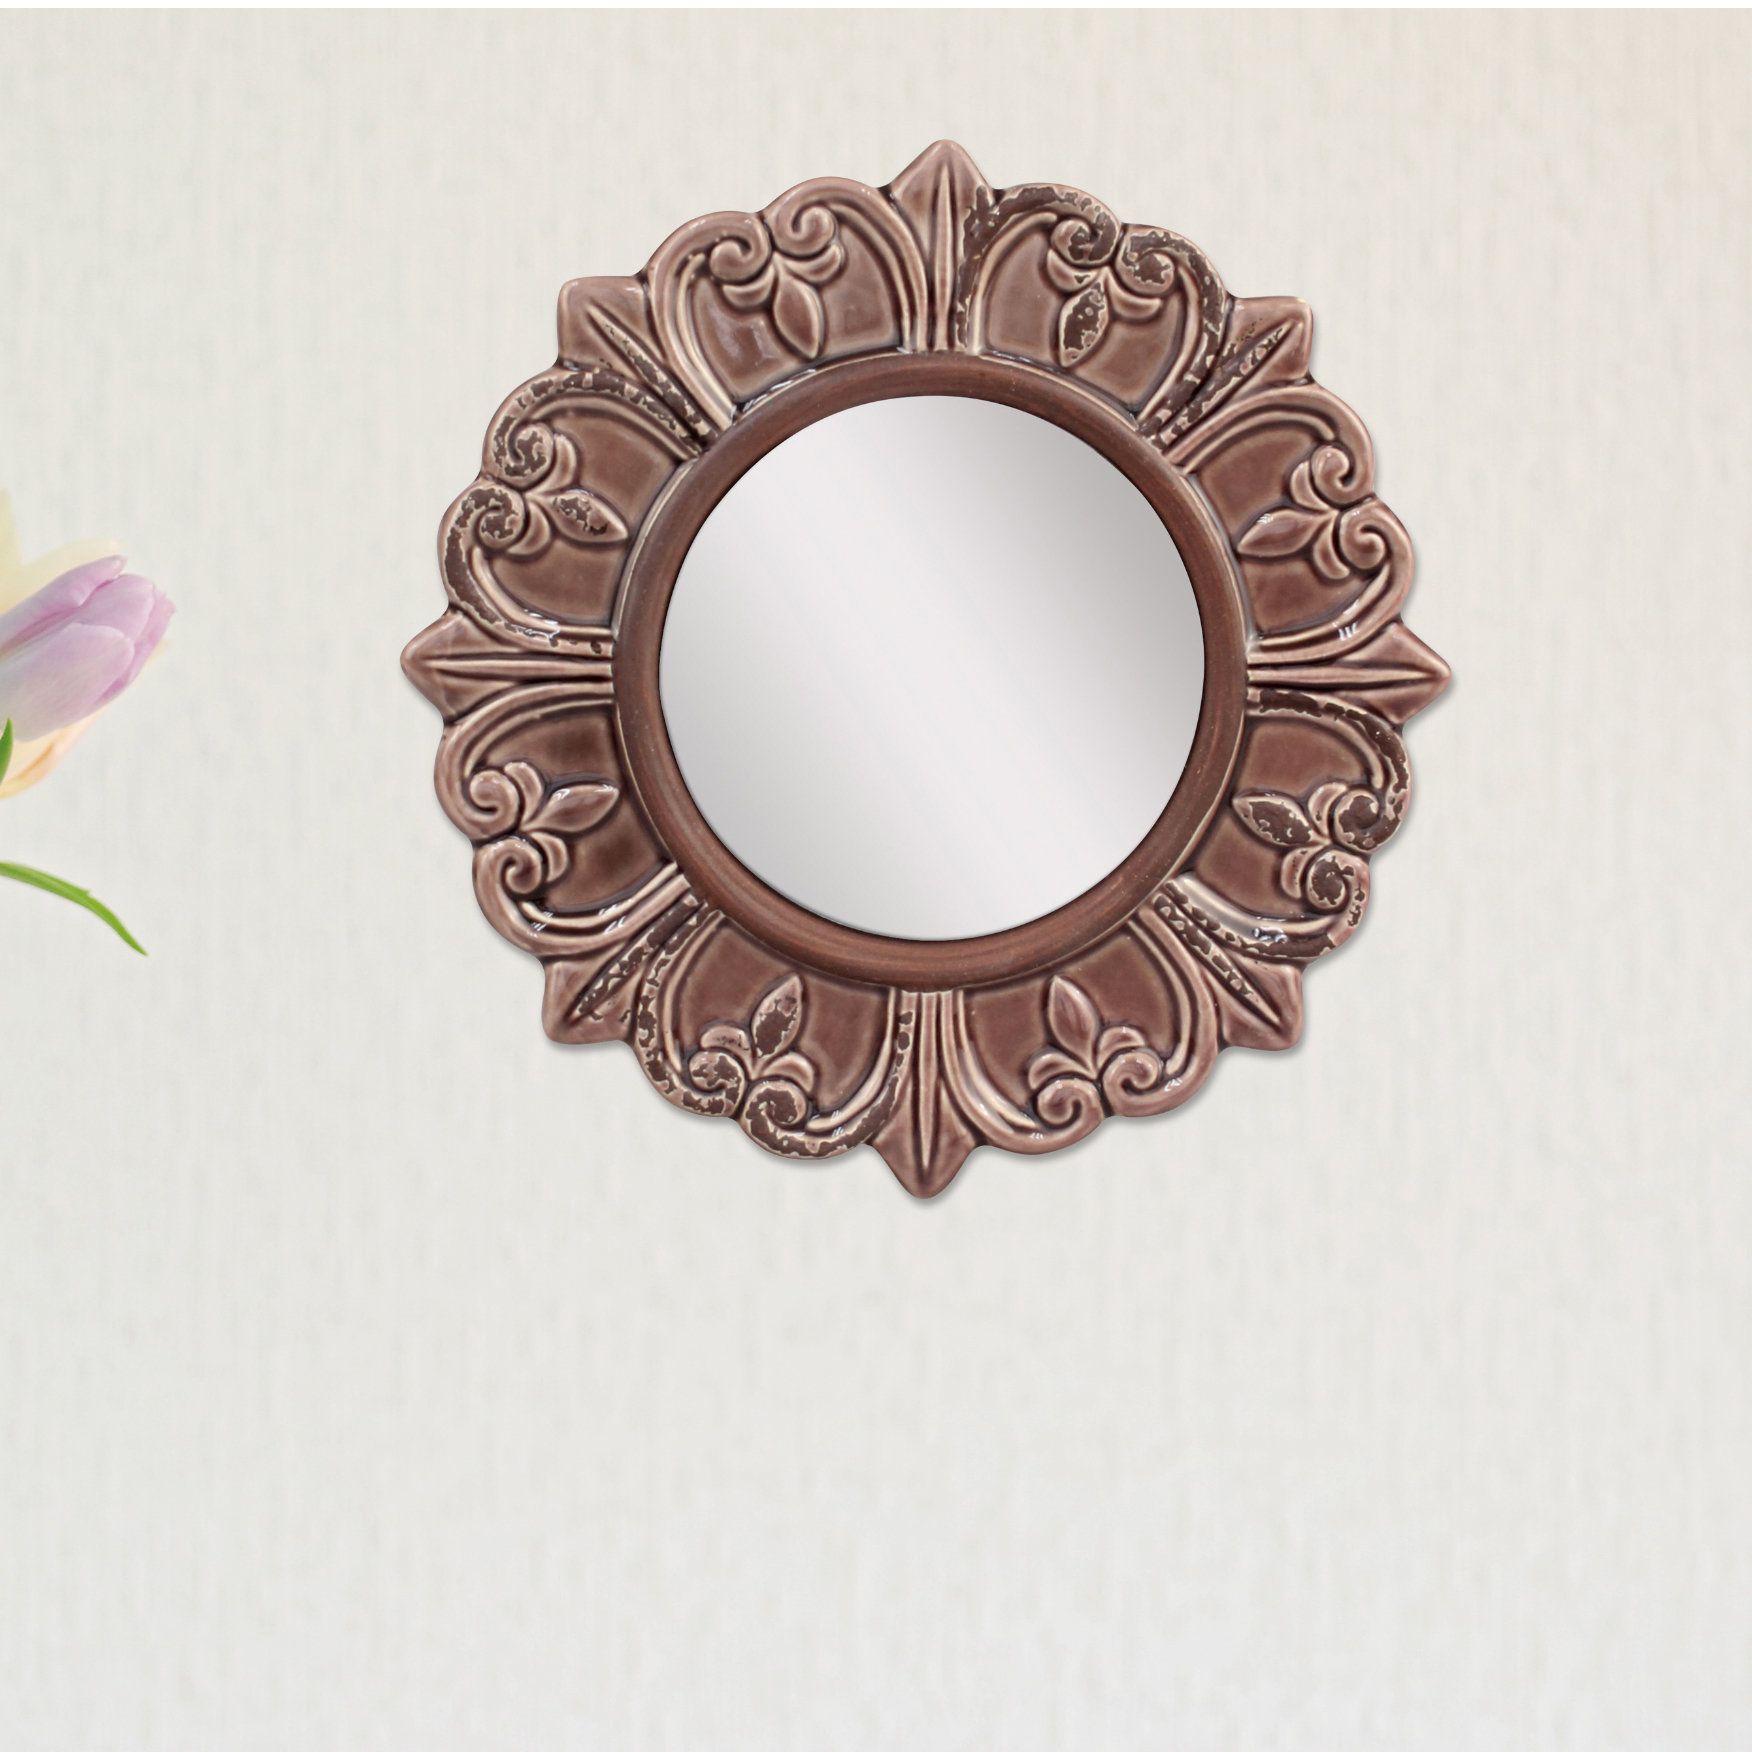 Karn Vertical Round Resin Wall Mirrors In Most Recent Waverly Place Round Distressed Wall Mirror (View 12 of 20)